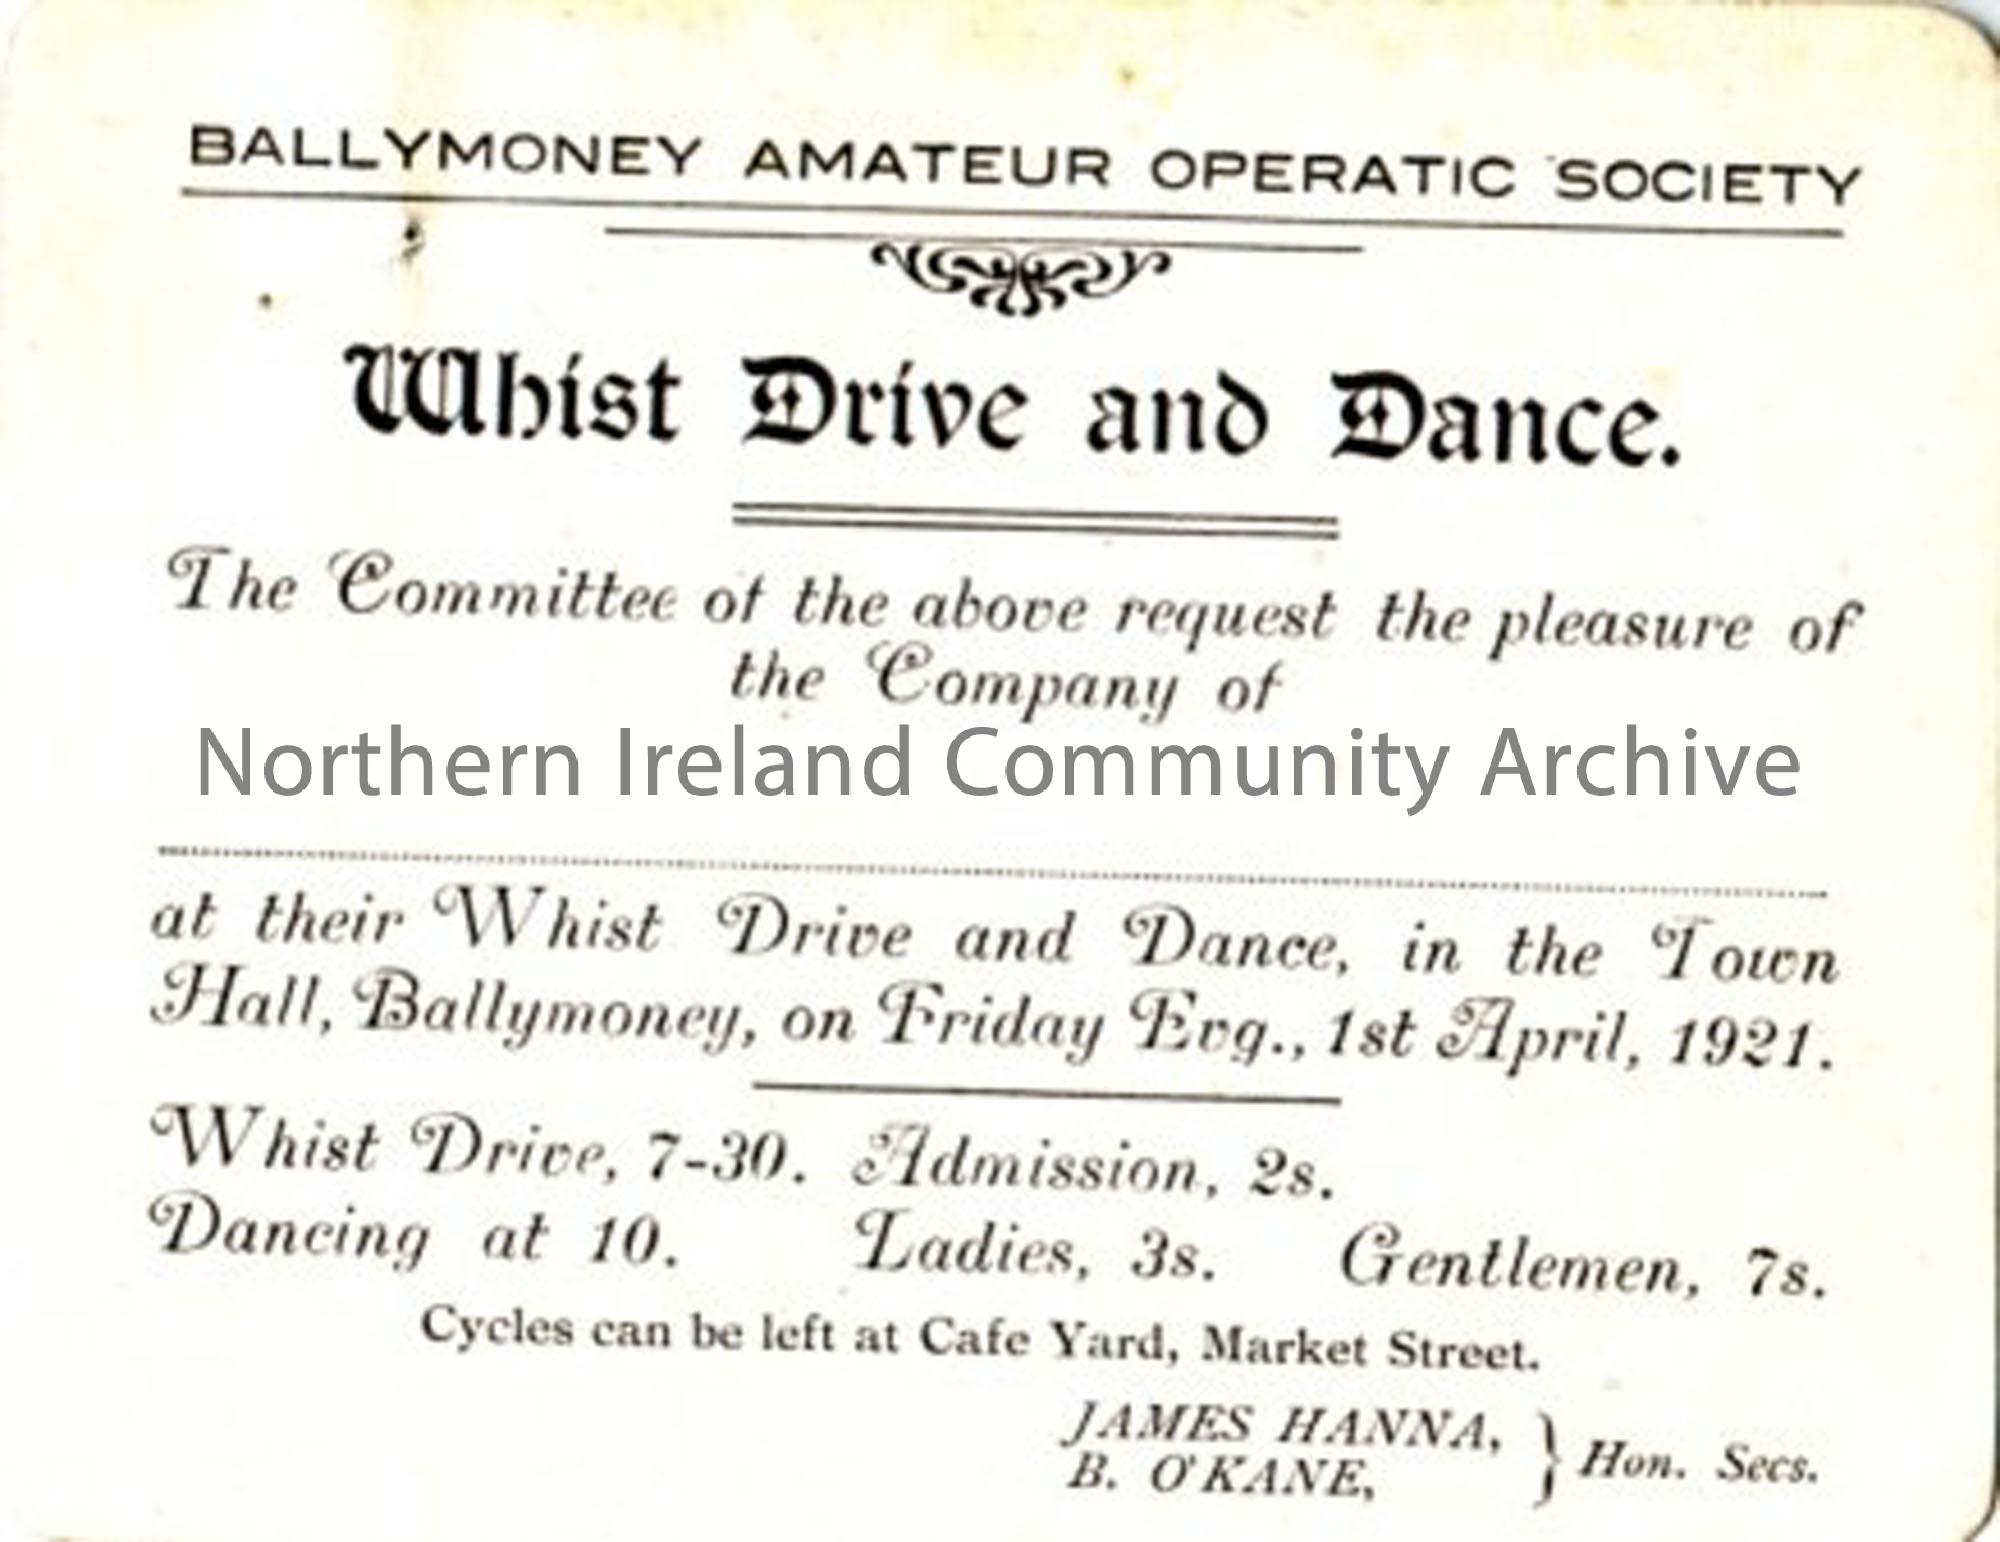 Ballymoney Amateur Operatic Society ‘Whist Drive and Dance’. 1st April 1921.